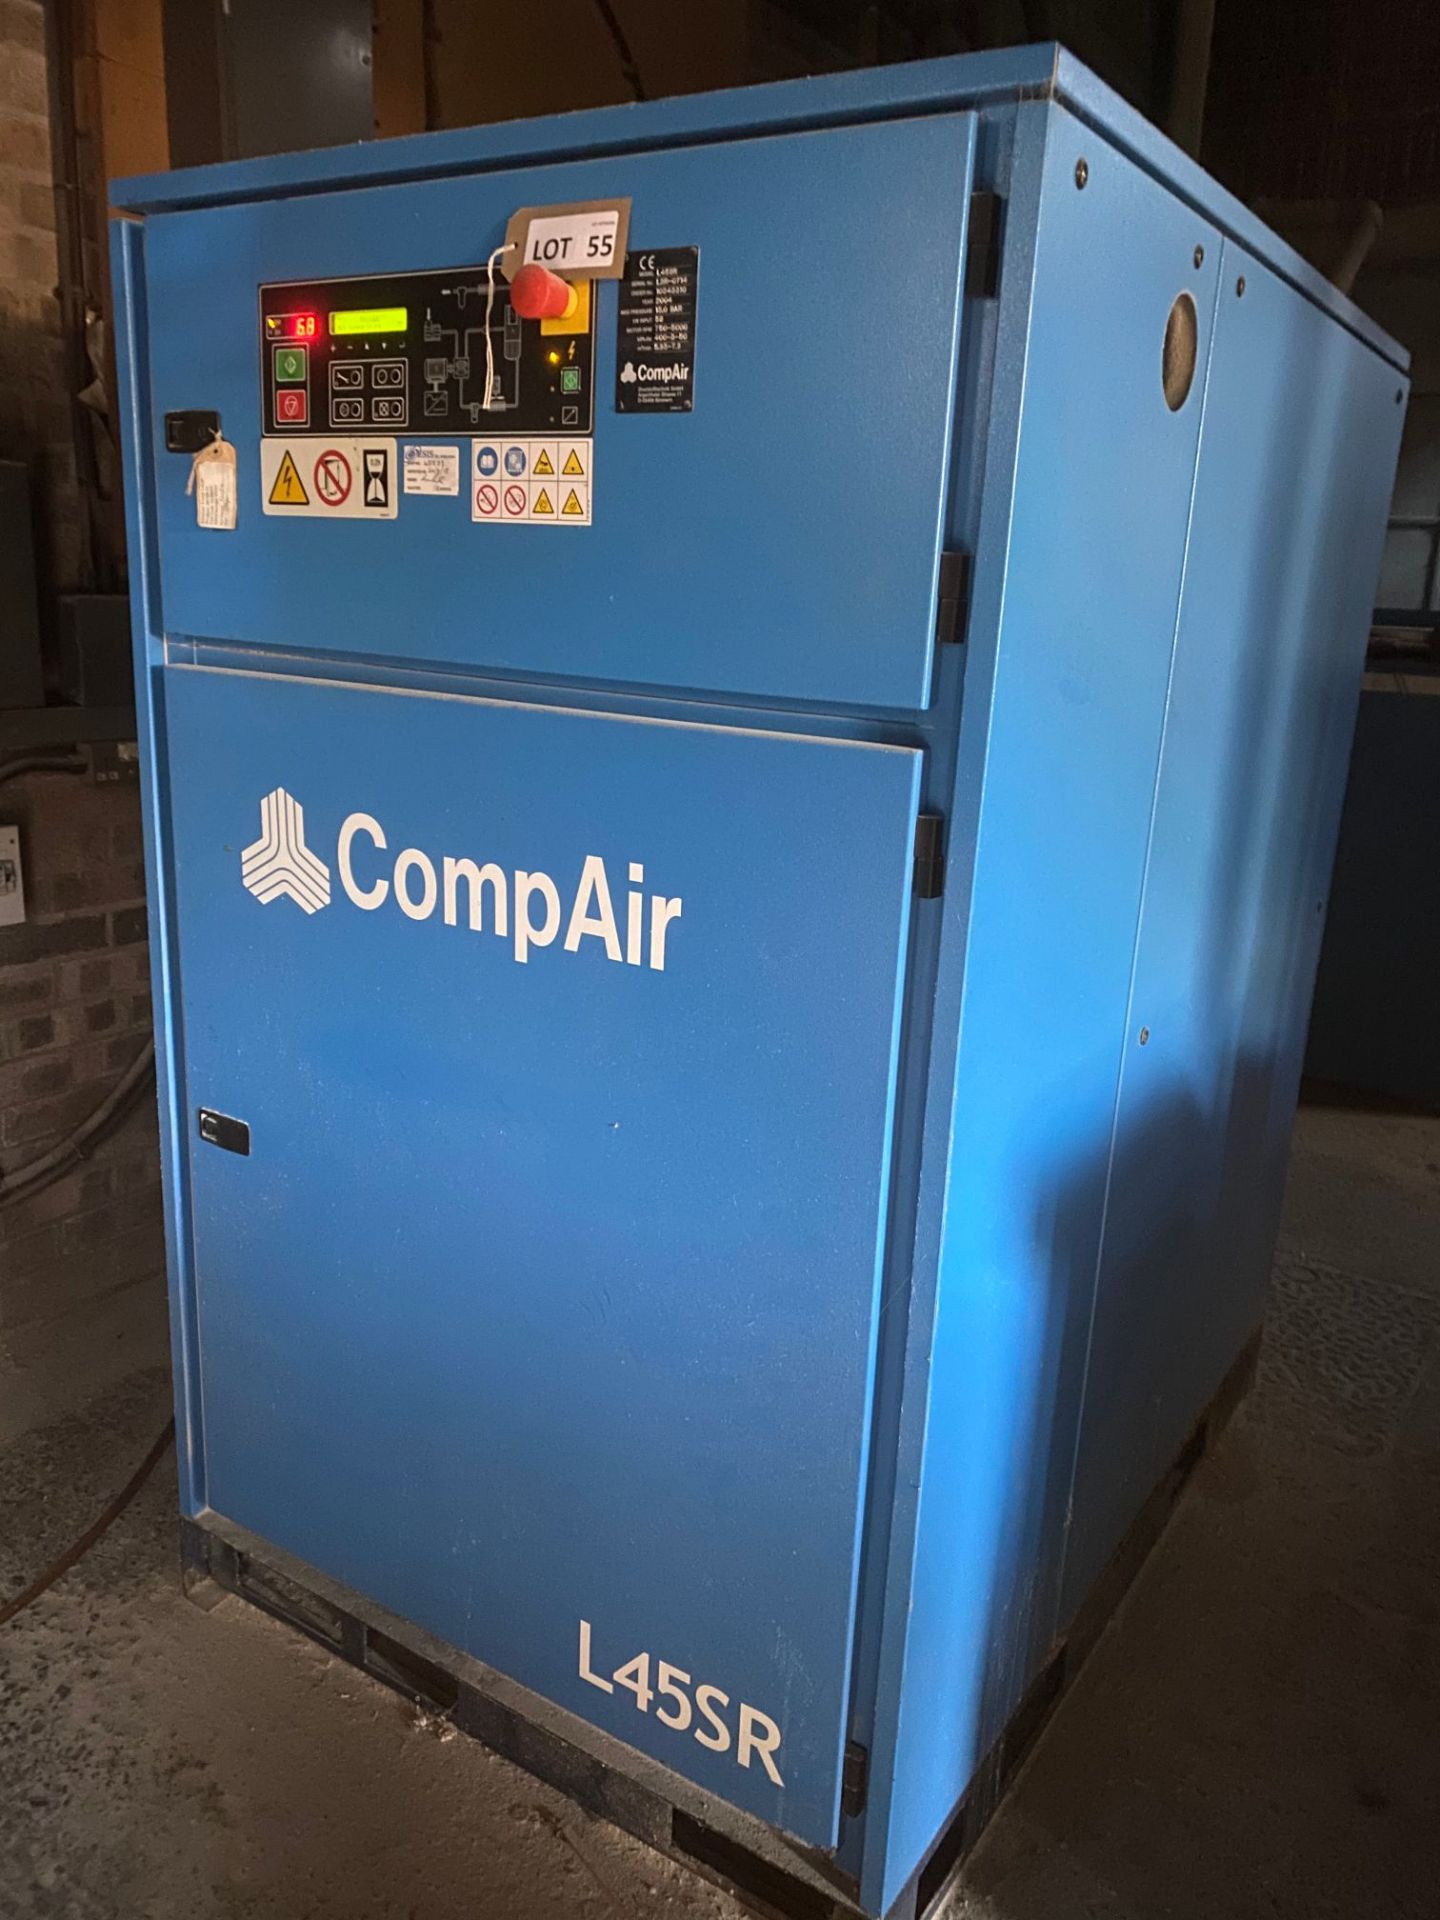 Compair L45SR 58Kw 13-bar air compressor, serial no: LSR-0714 (2004) (in outside shed)